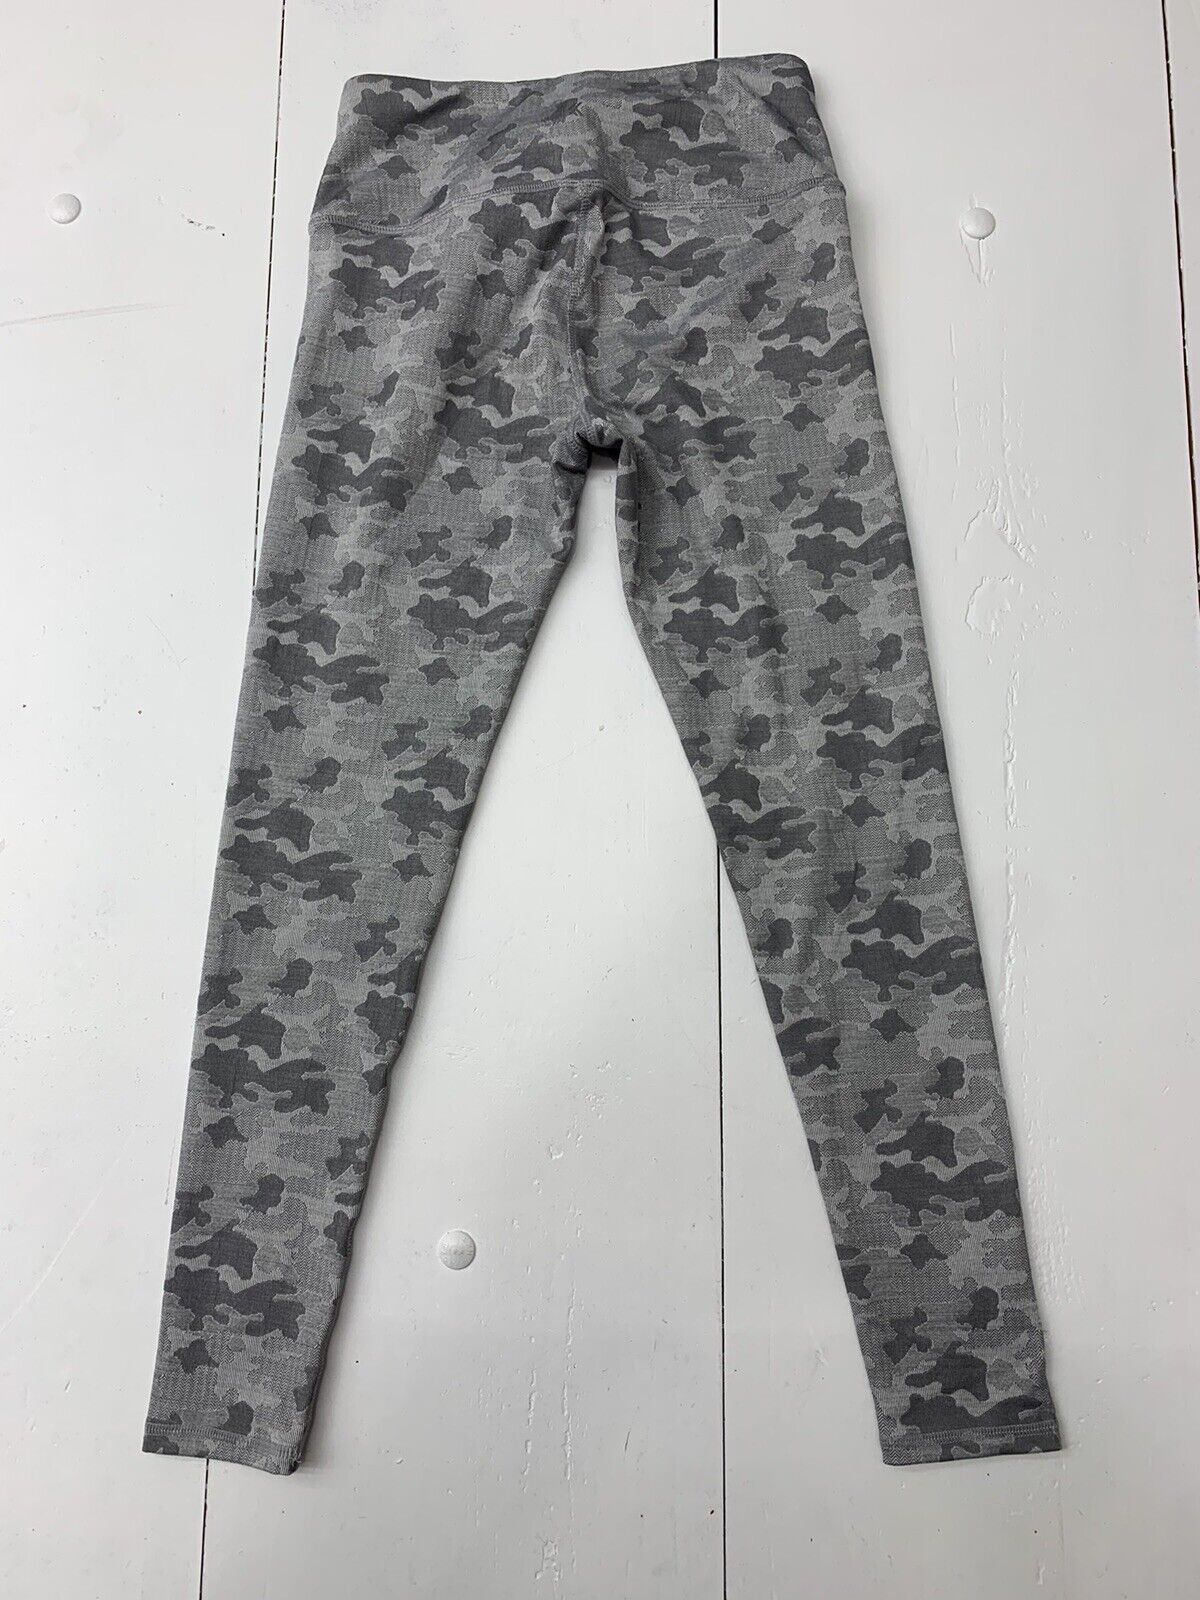 Kyodan Womens Grey Camouflage Athletic Leggings Size Small - beyond exchange